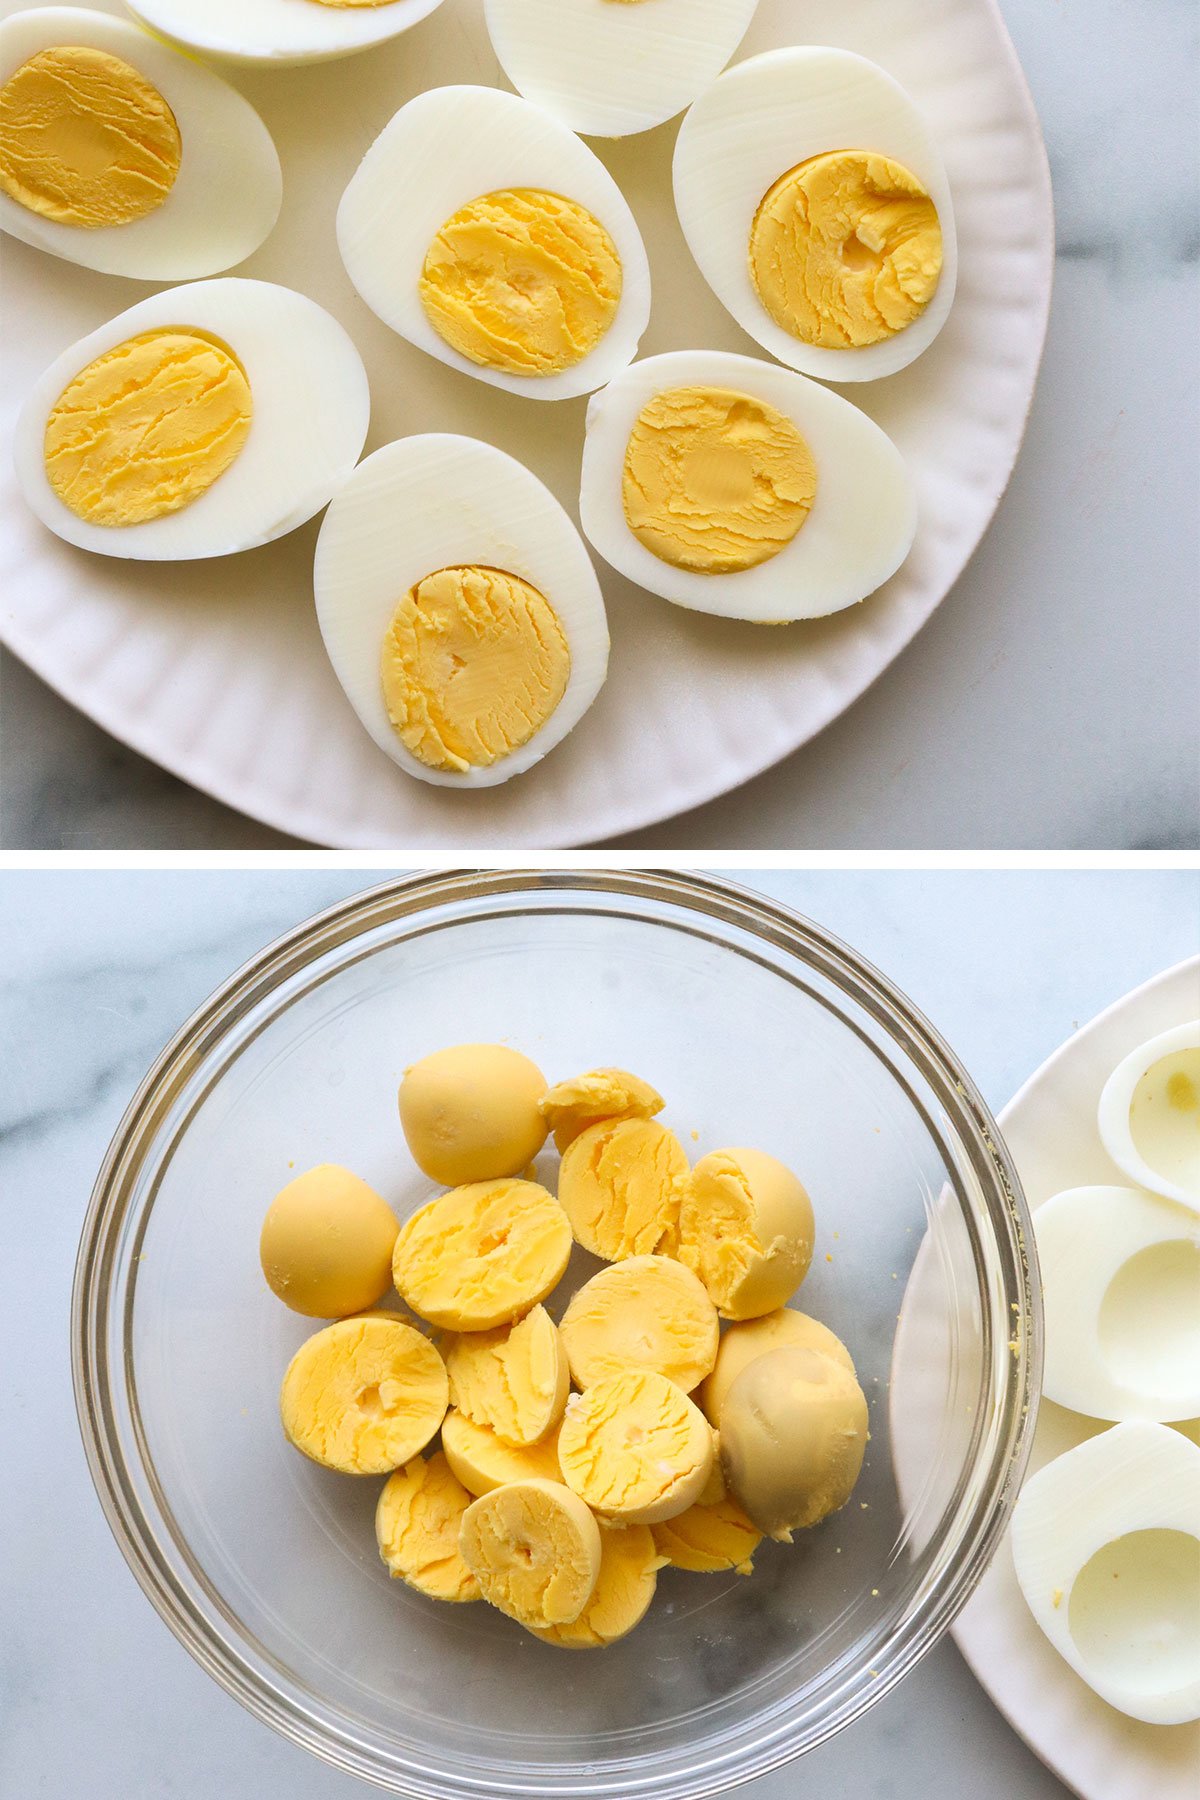 hard boiled eggs sliced and yolks added to a glass bowl.